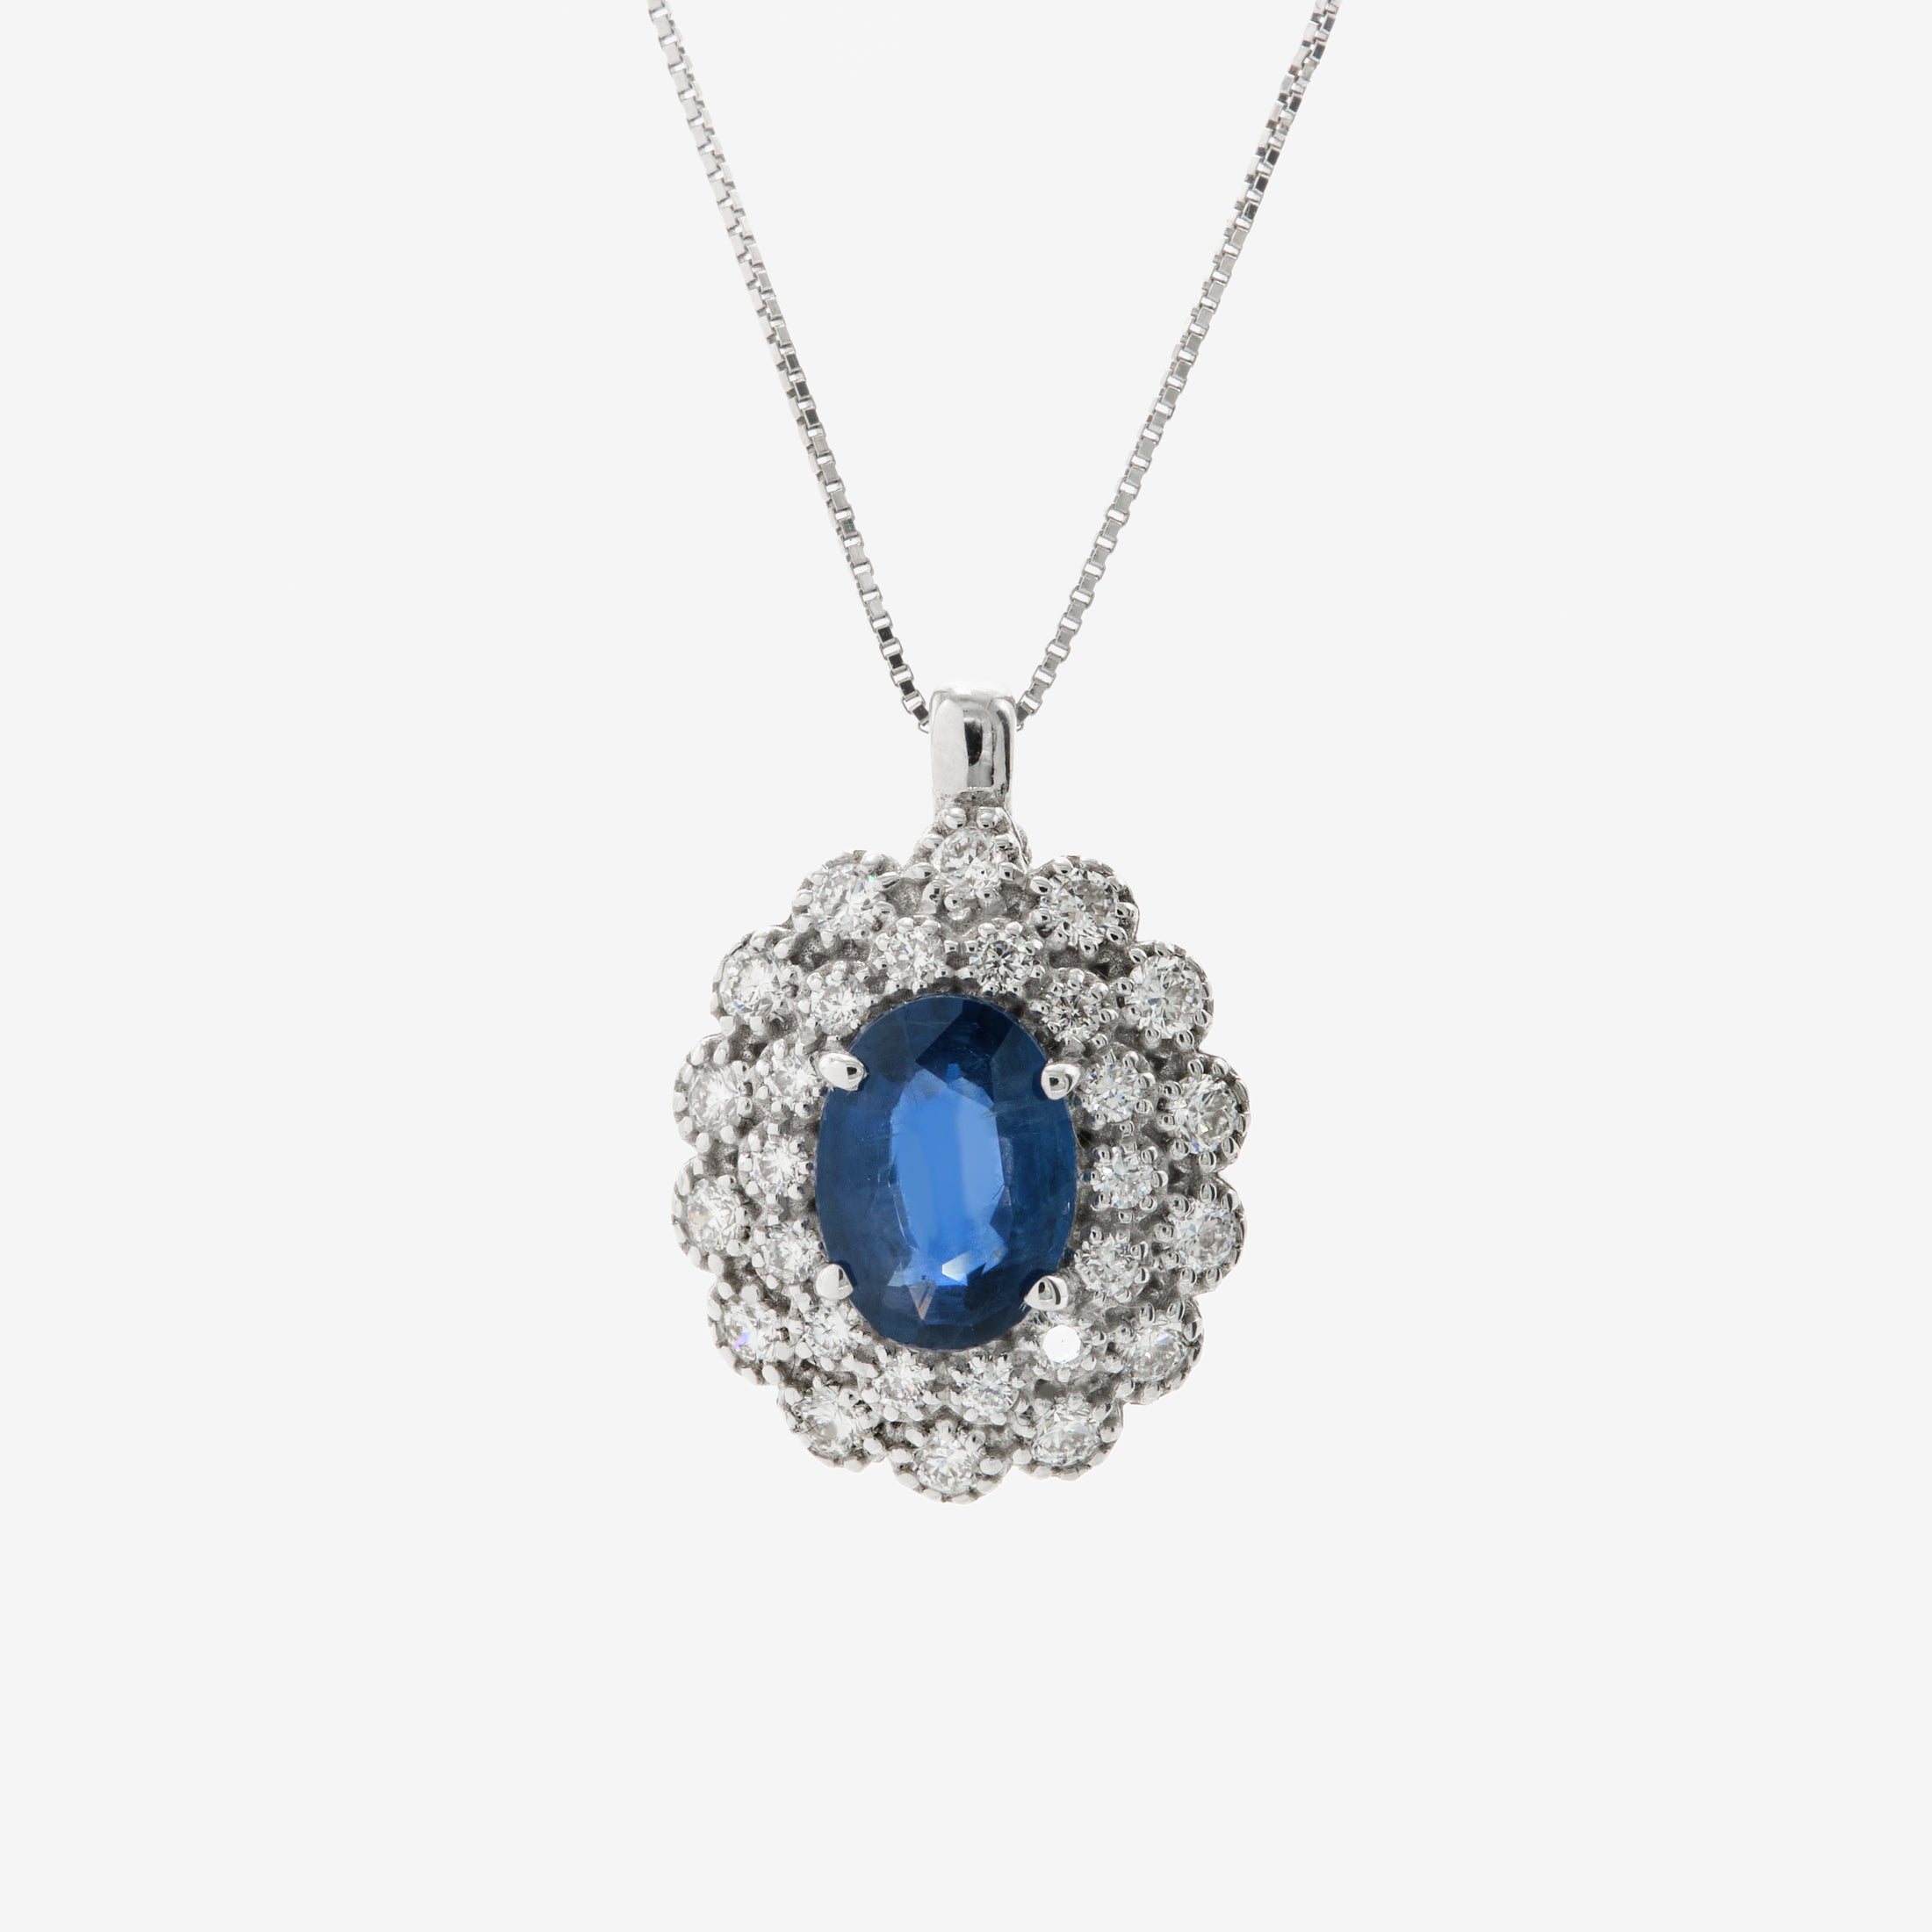 Julio necklace with sapphire and diamonds